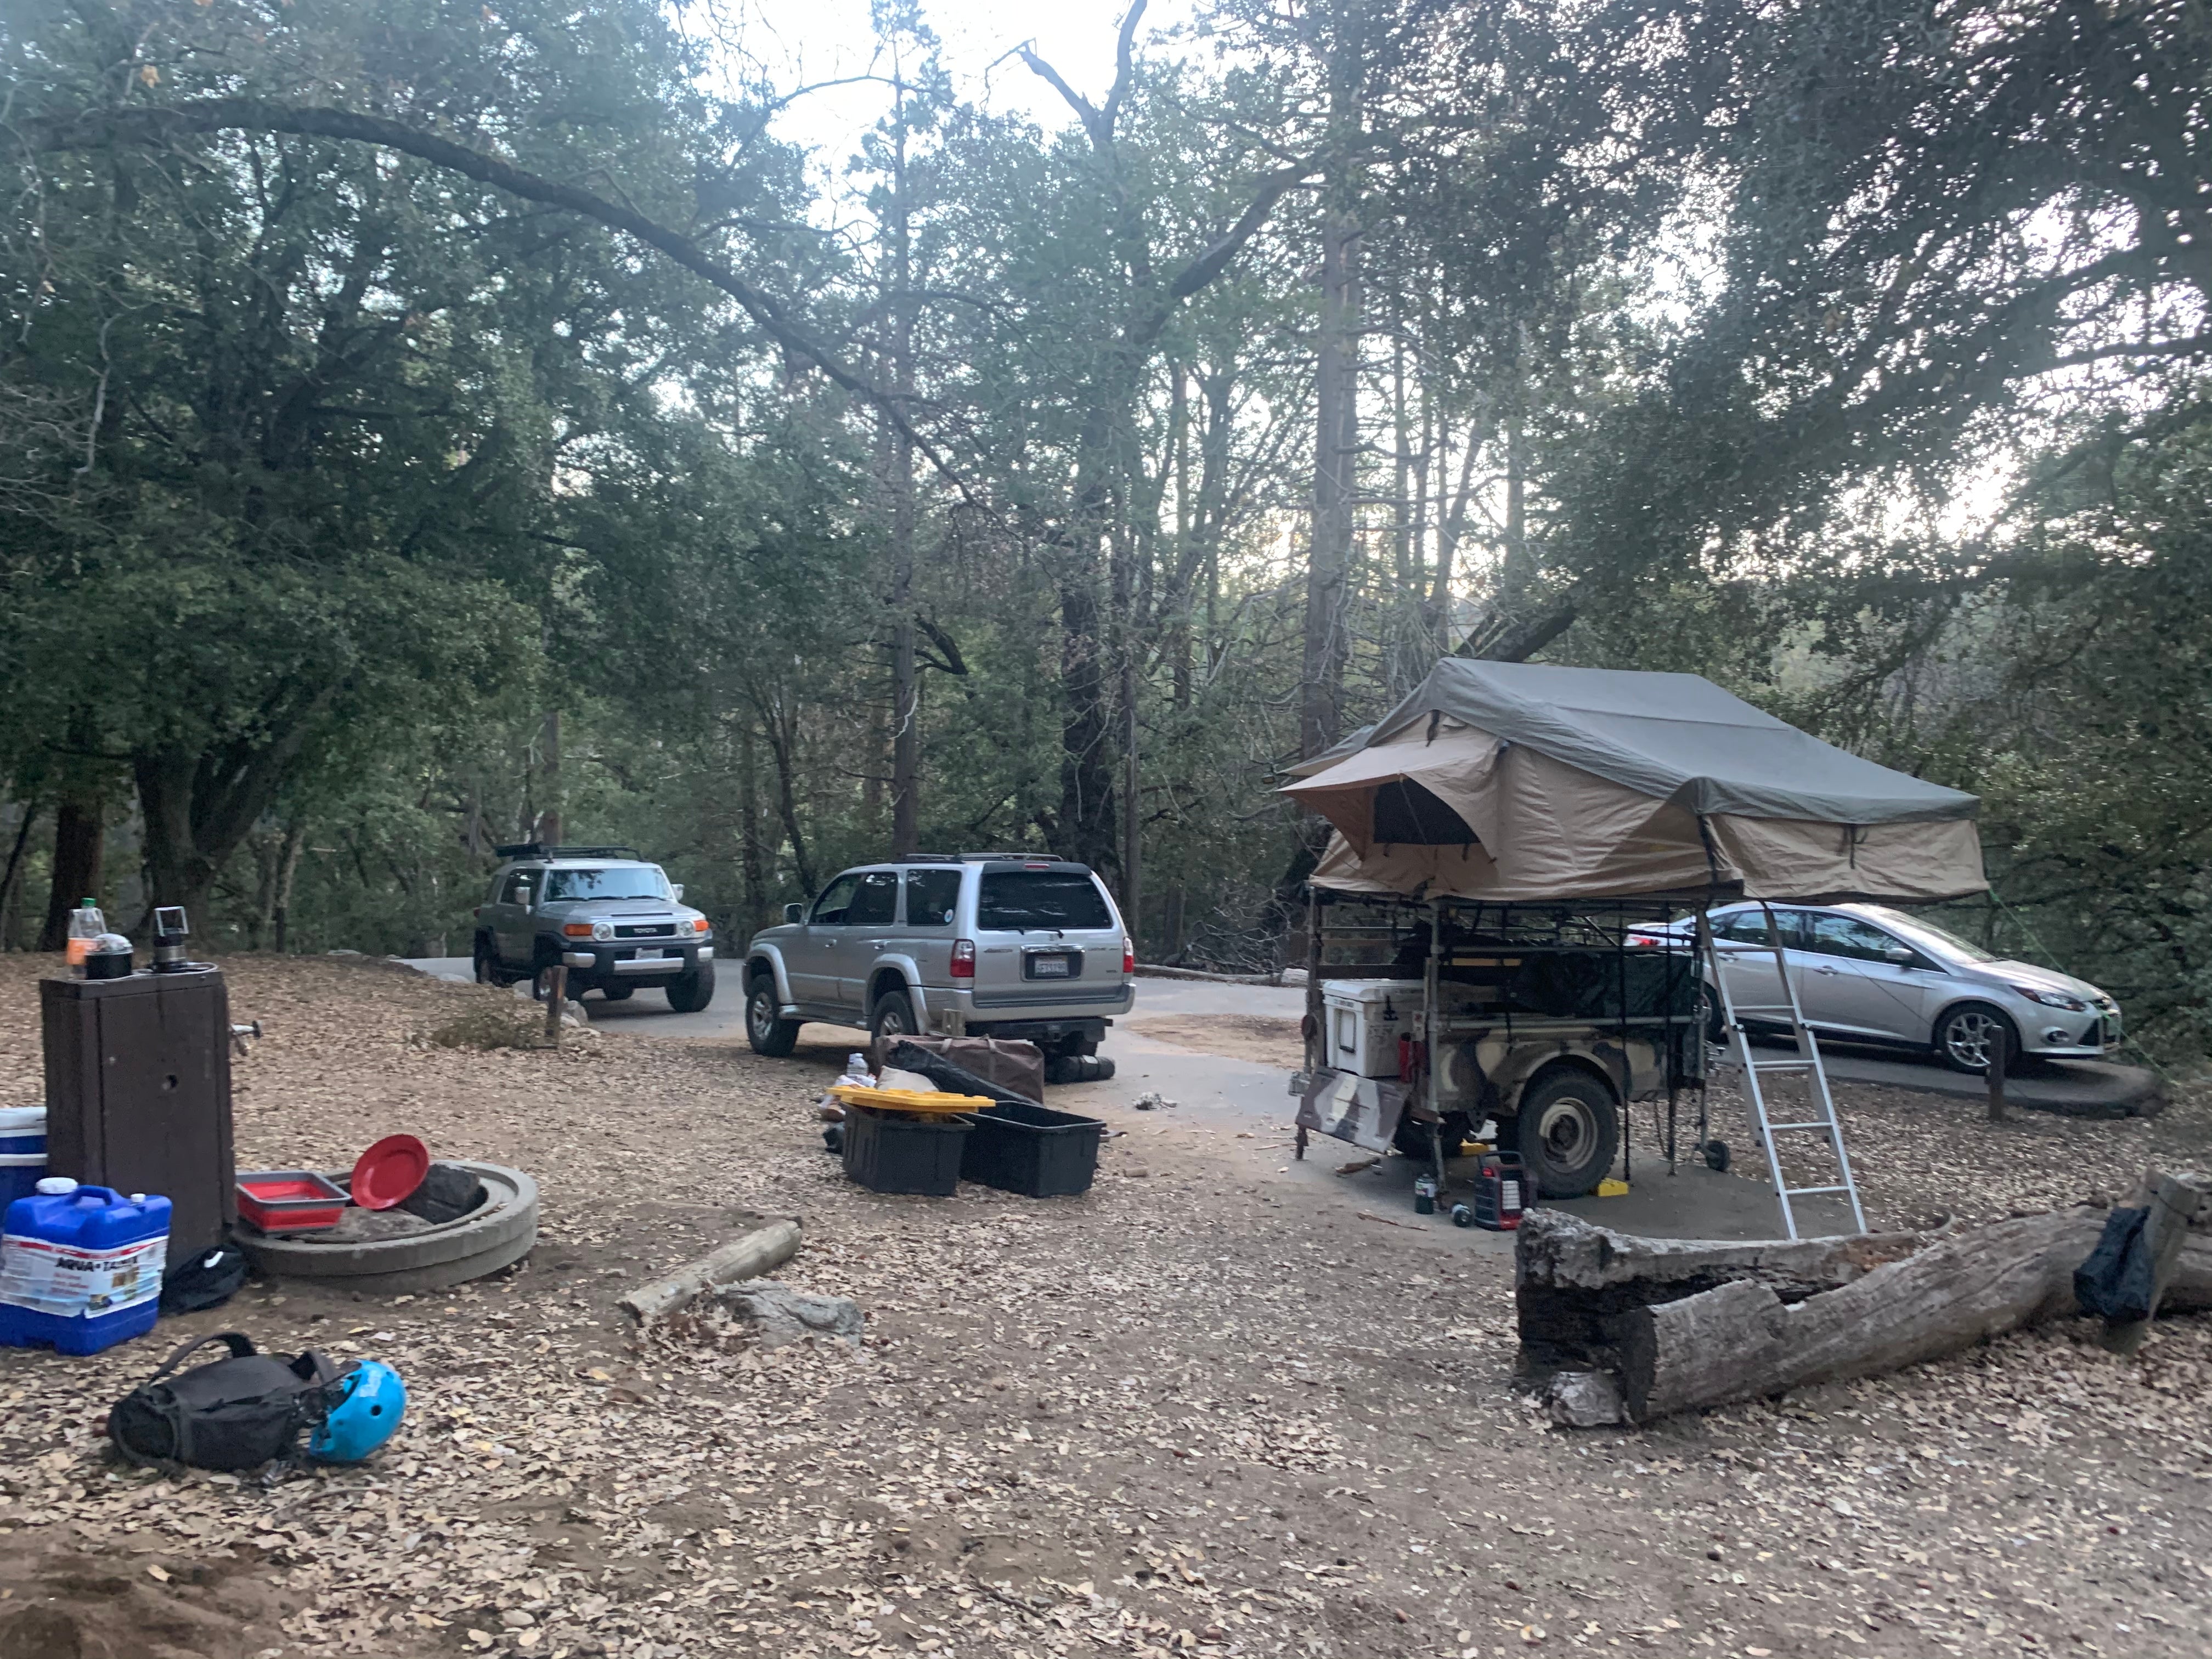 Camper submitted image from Palomar Mountain State Park Campground - 5